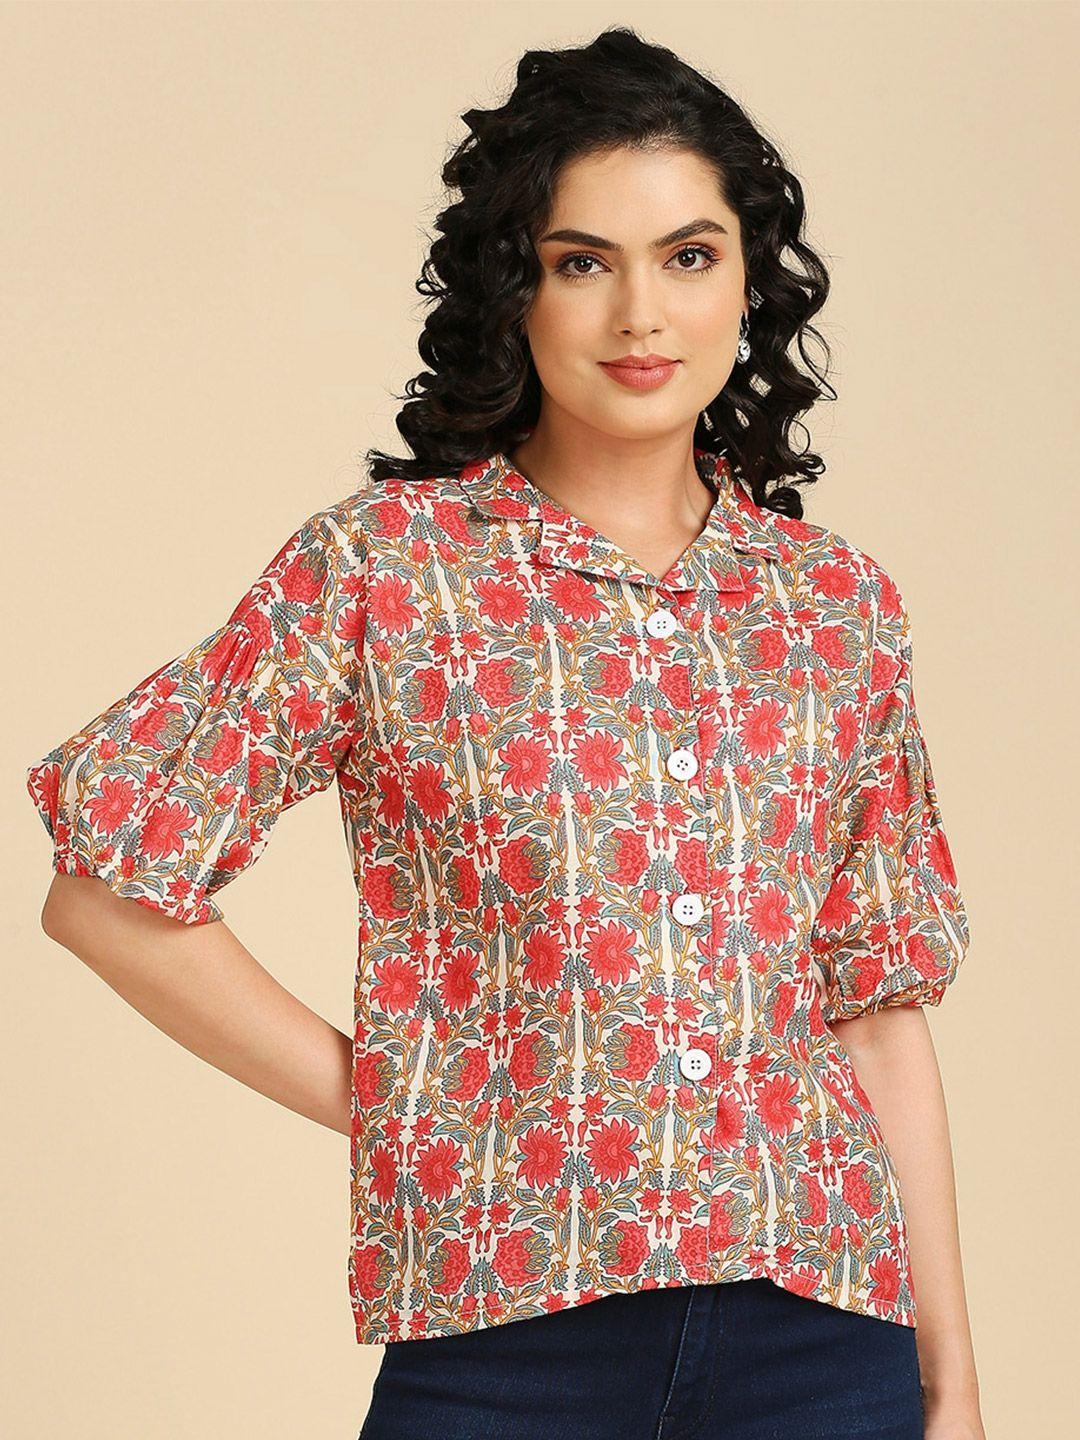 gufrina red floral print cotton shirt style top